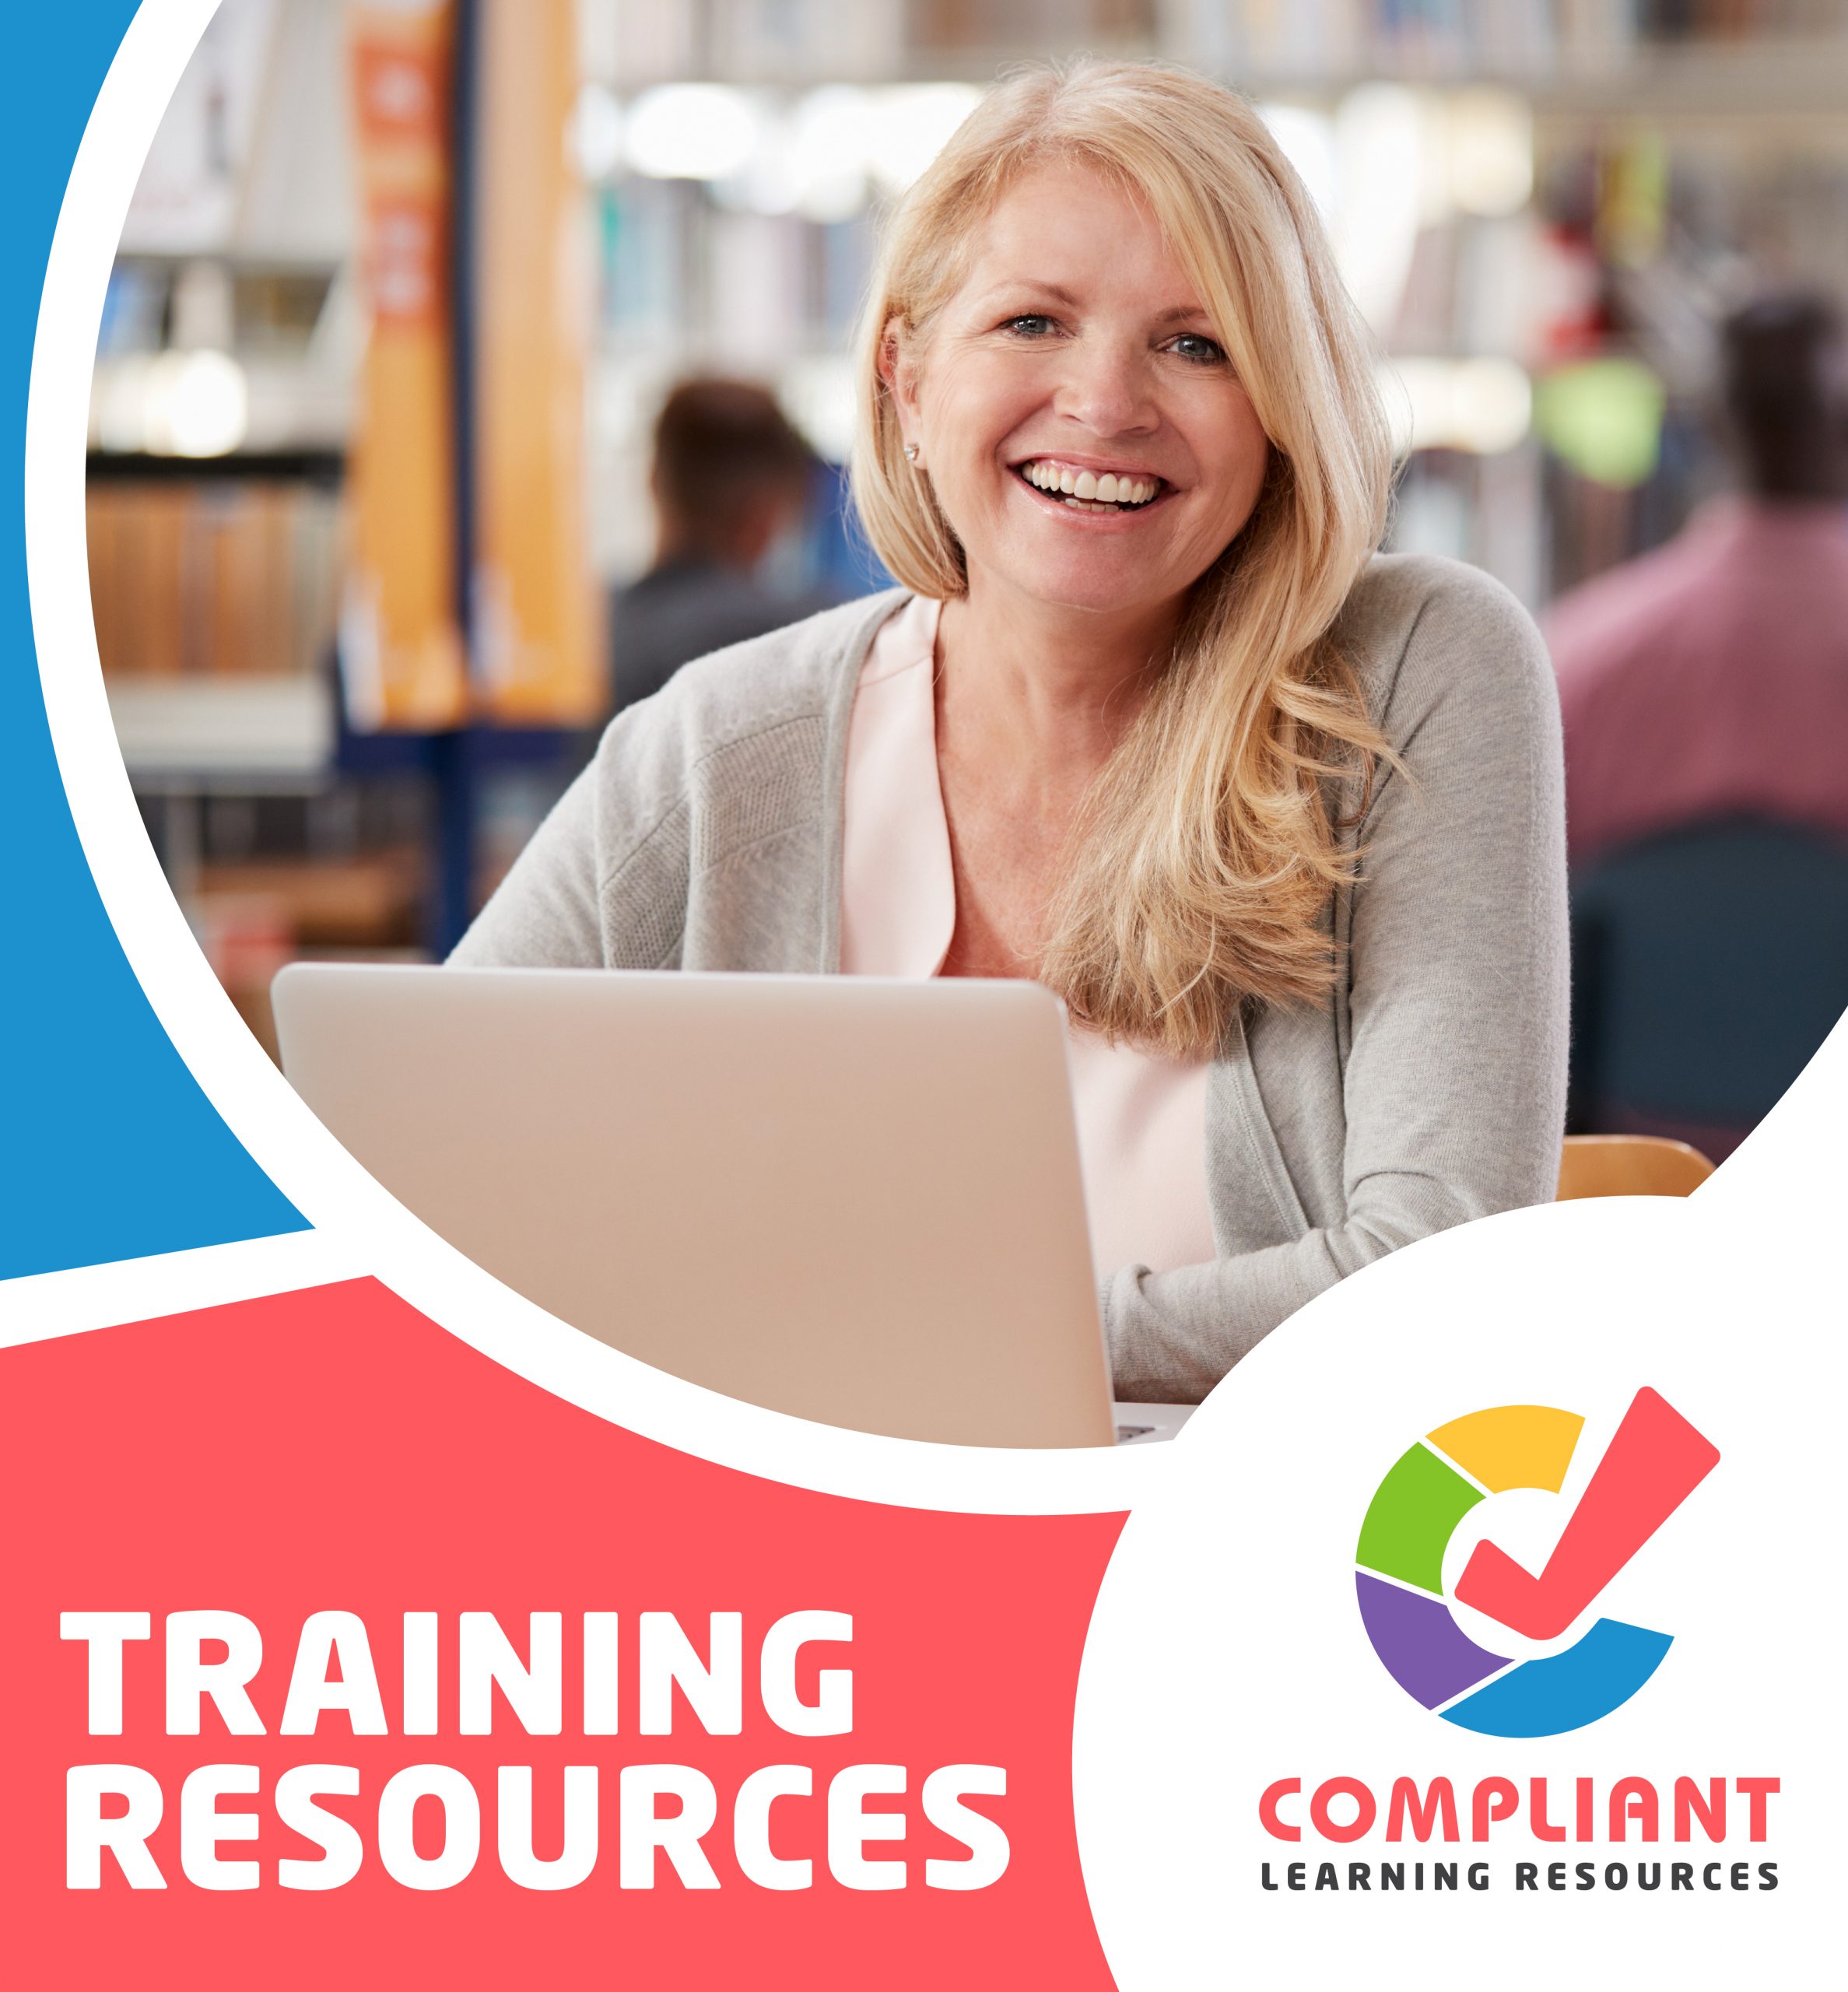 Compliant Learning Resources